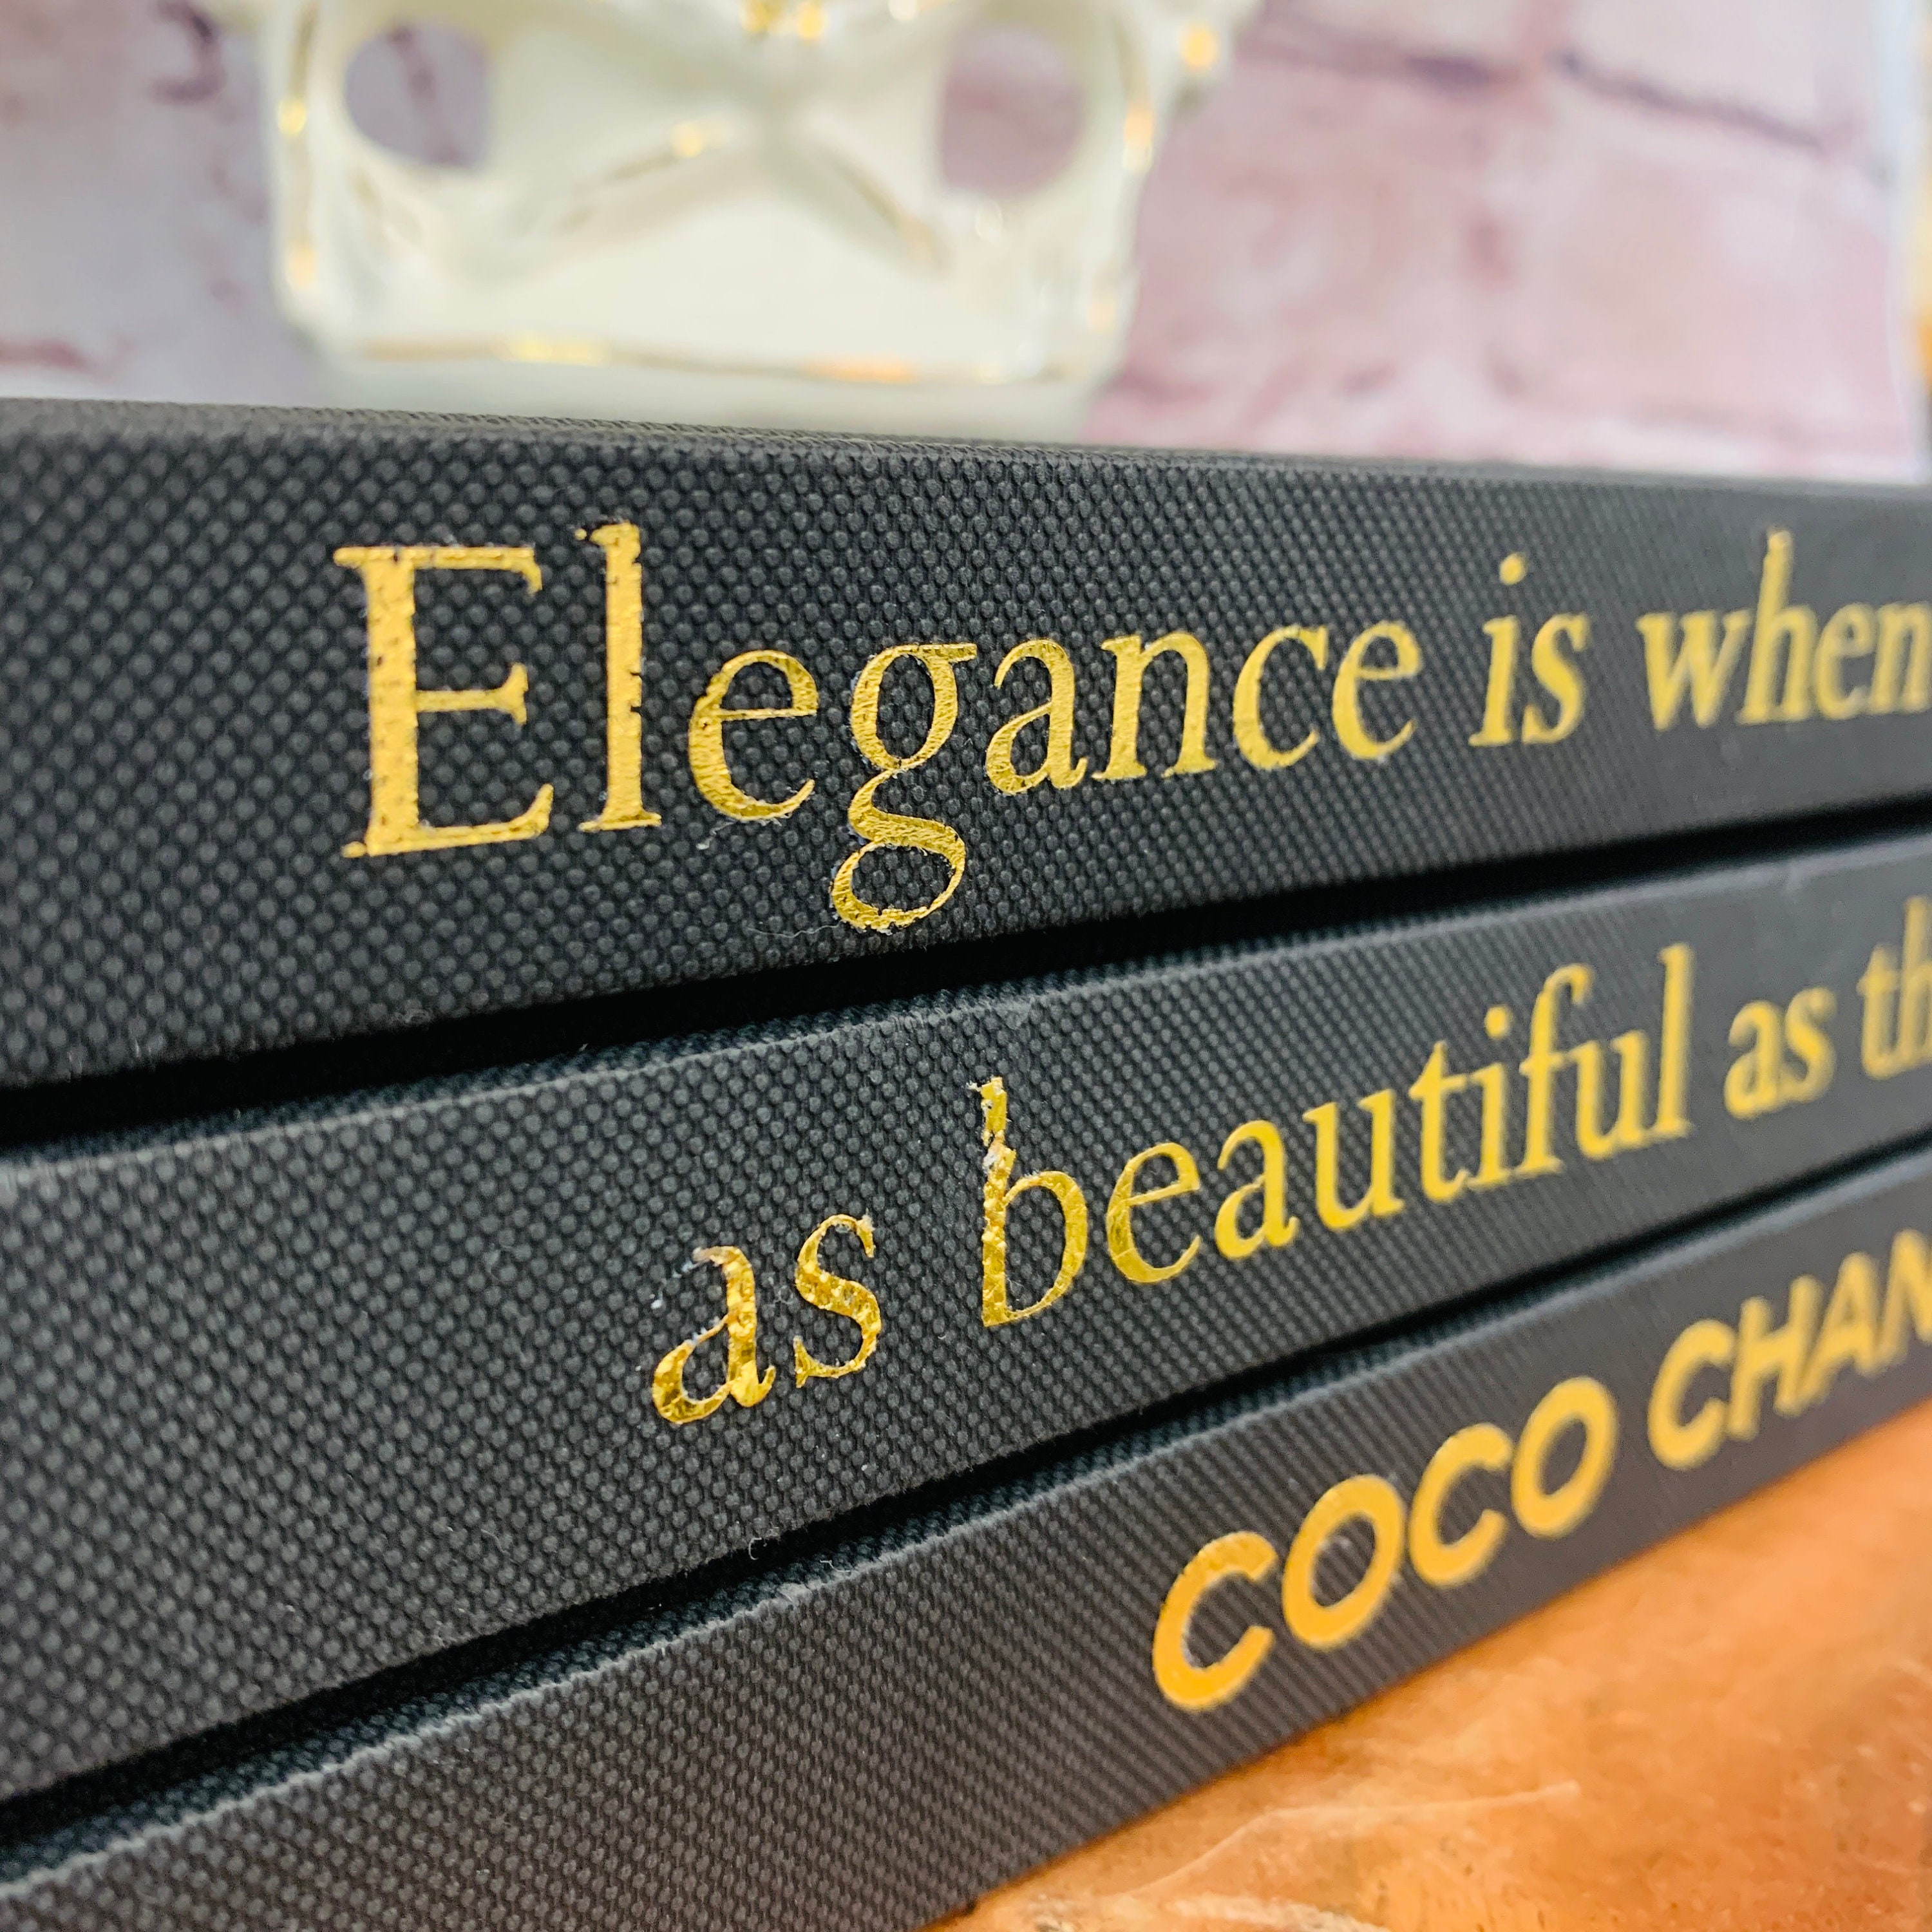 Another #bookstack and #bling #chanel logo!! 😍😍#chaneldecor #coco #h